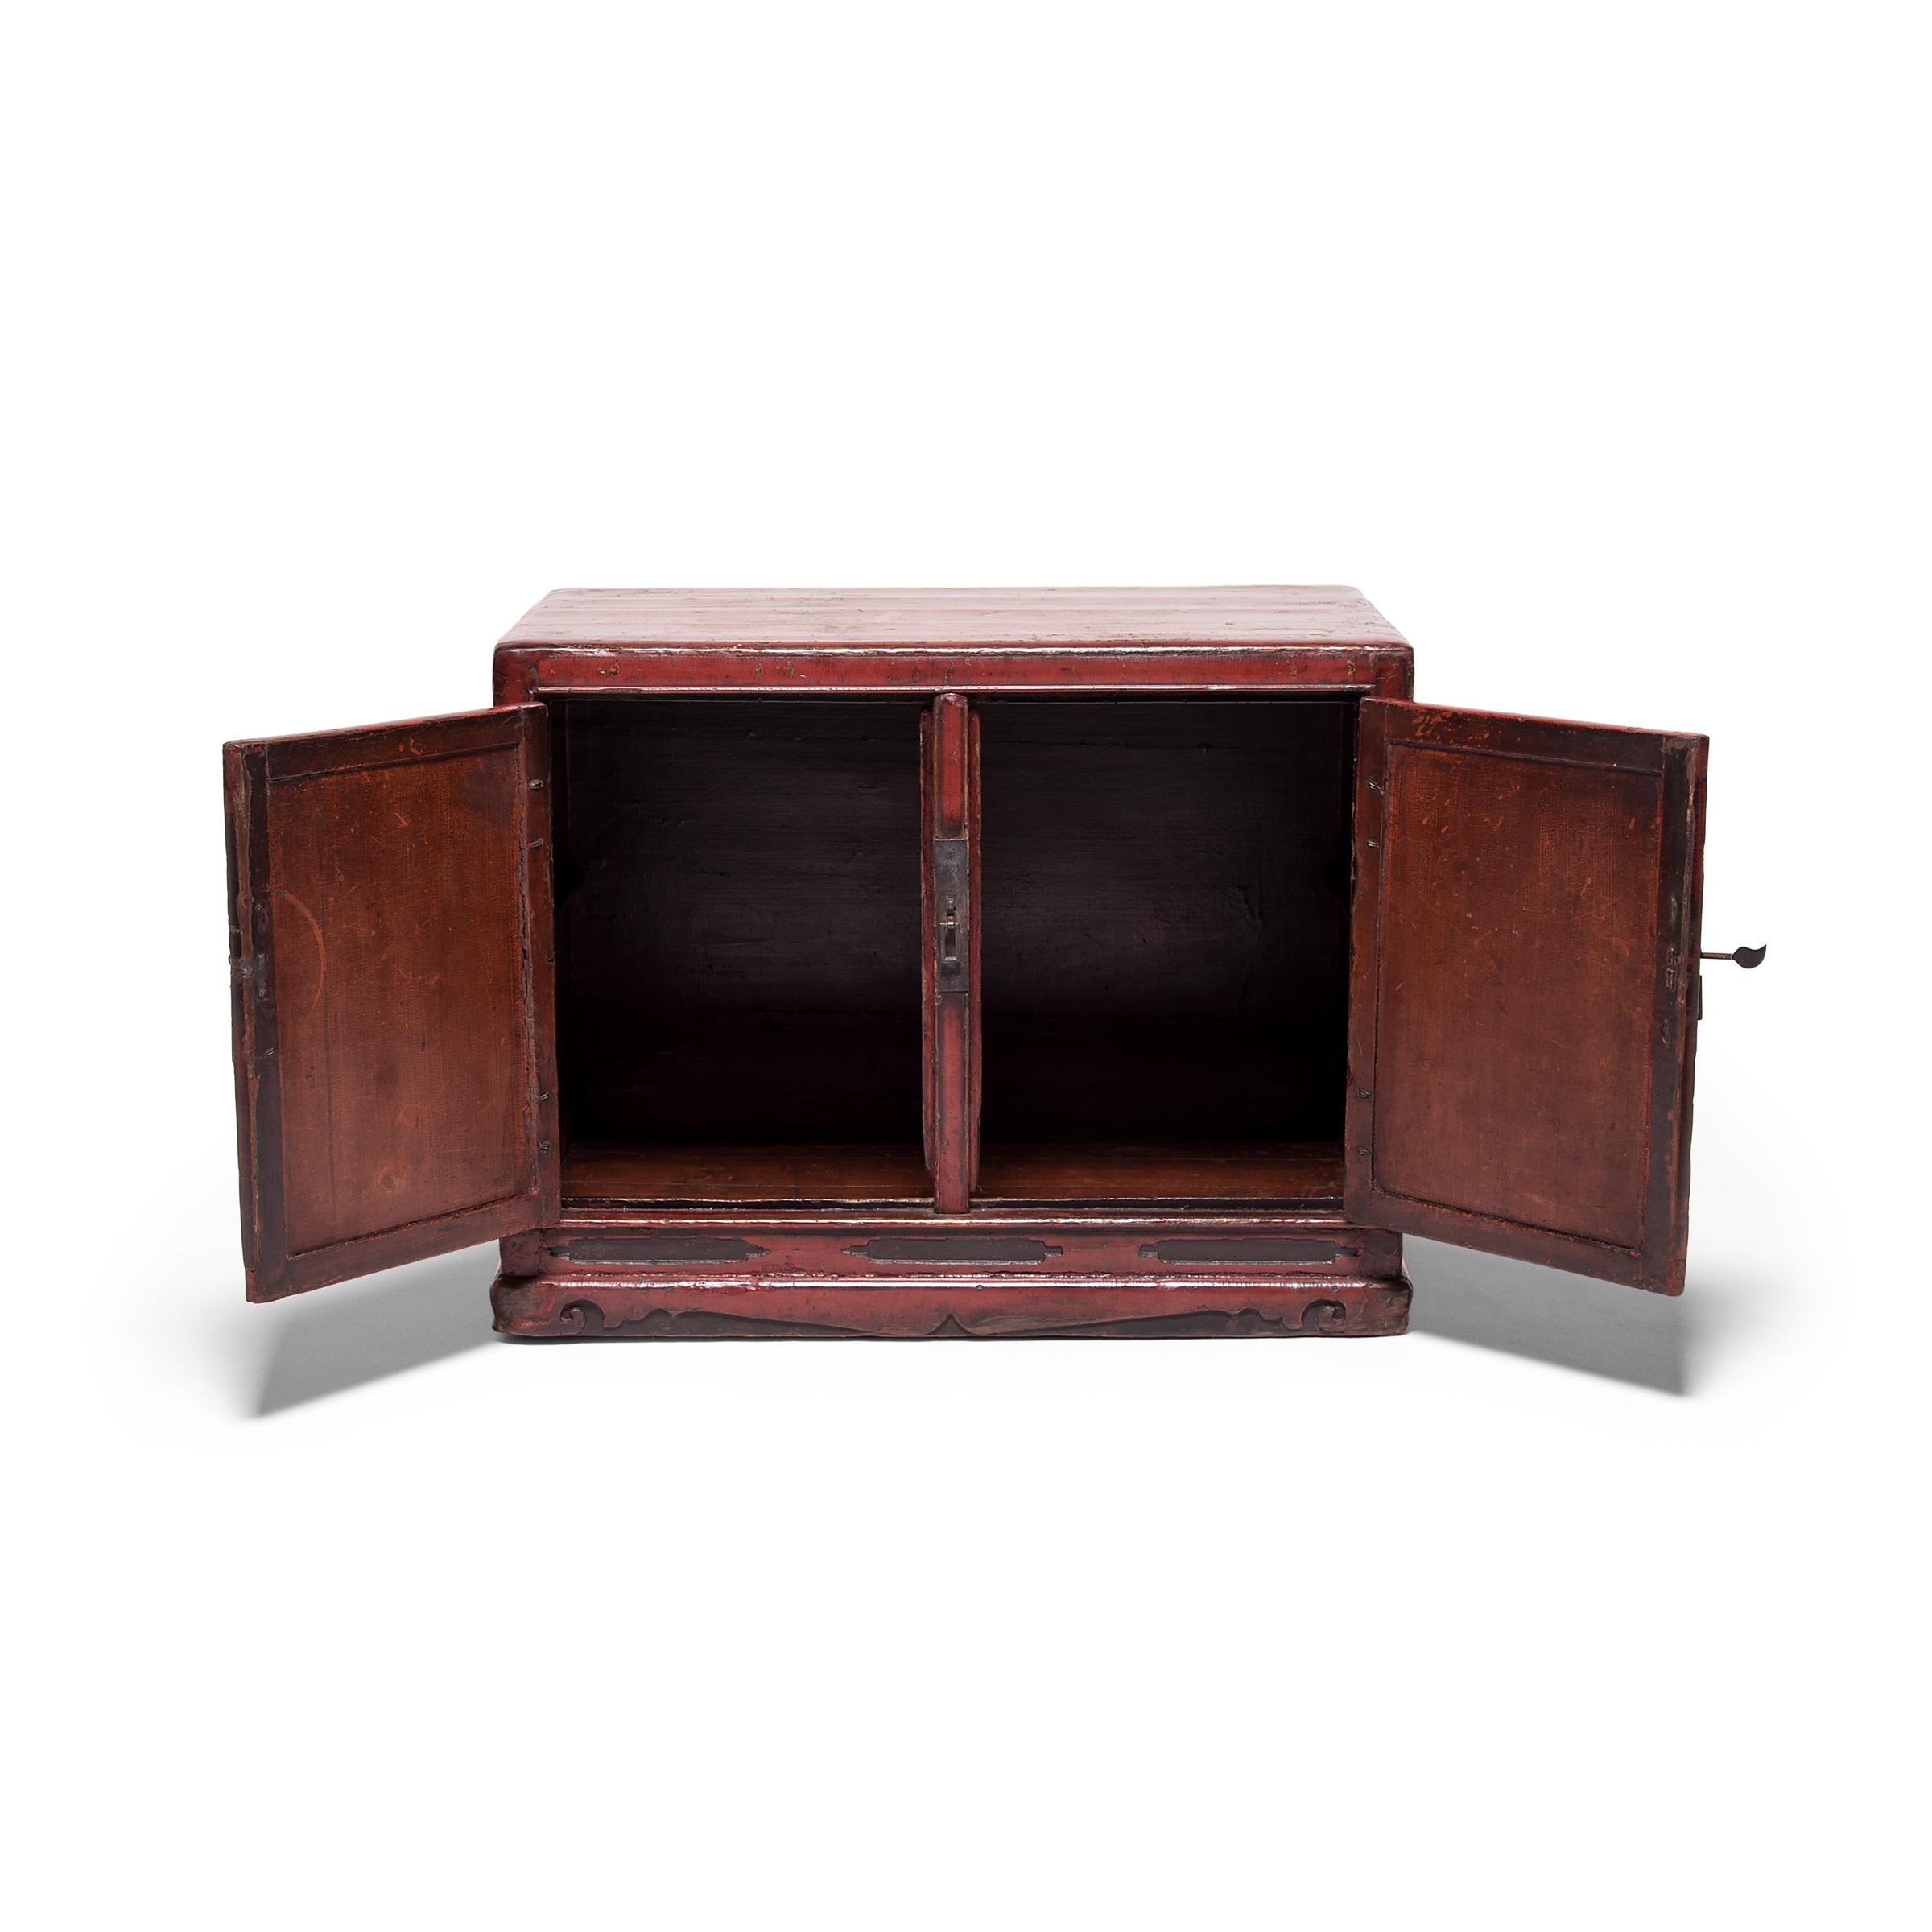 A rolled-up scroll or treasured root pot may have once been among the treasured objects stored in this 19th century book chest. Expertly constructed in China's Shanxi province, the low cabinet exemplifies the clean lines of Ming-dynasty forms. Layer